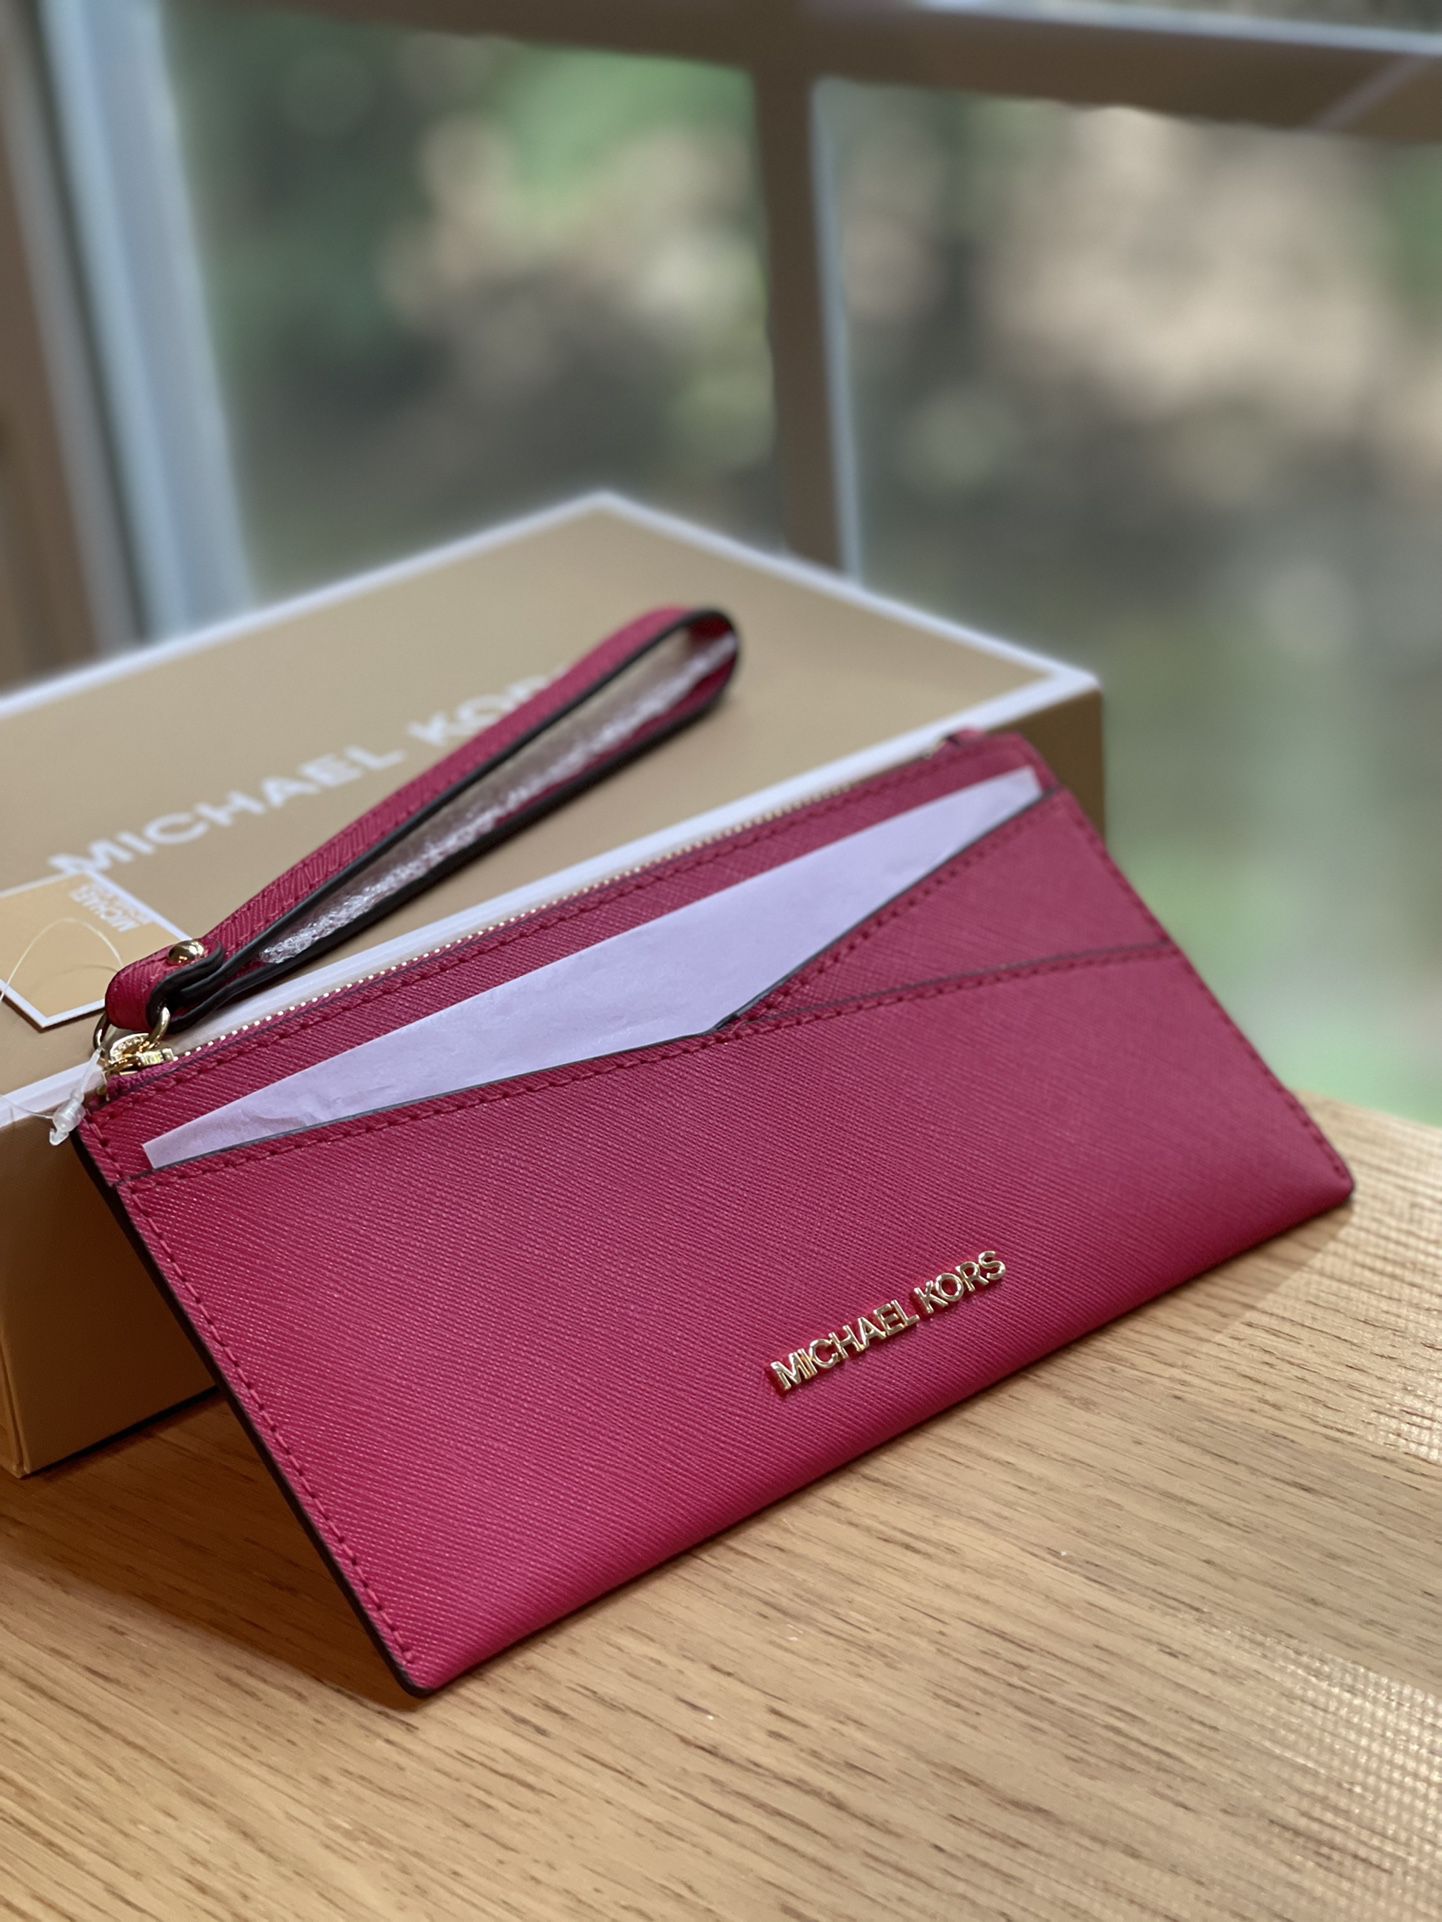 Michael Kors Set Medium Saffiano Leather Crossover Wristlet for Sale in Shelton, CT - OfferUp